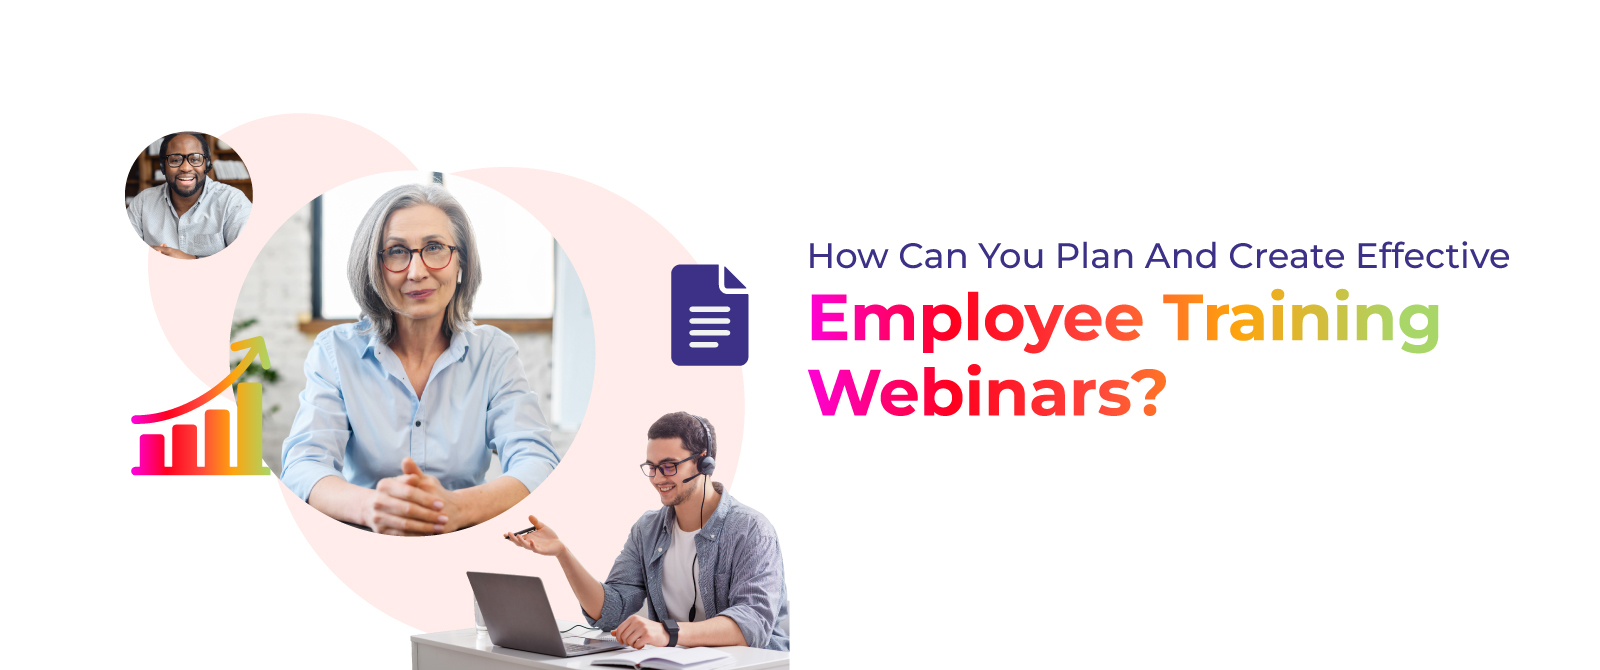 How Can You Plan and Create Effective Employee Training Webinars? Learn With This Guide.